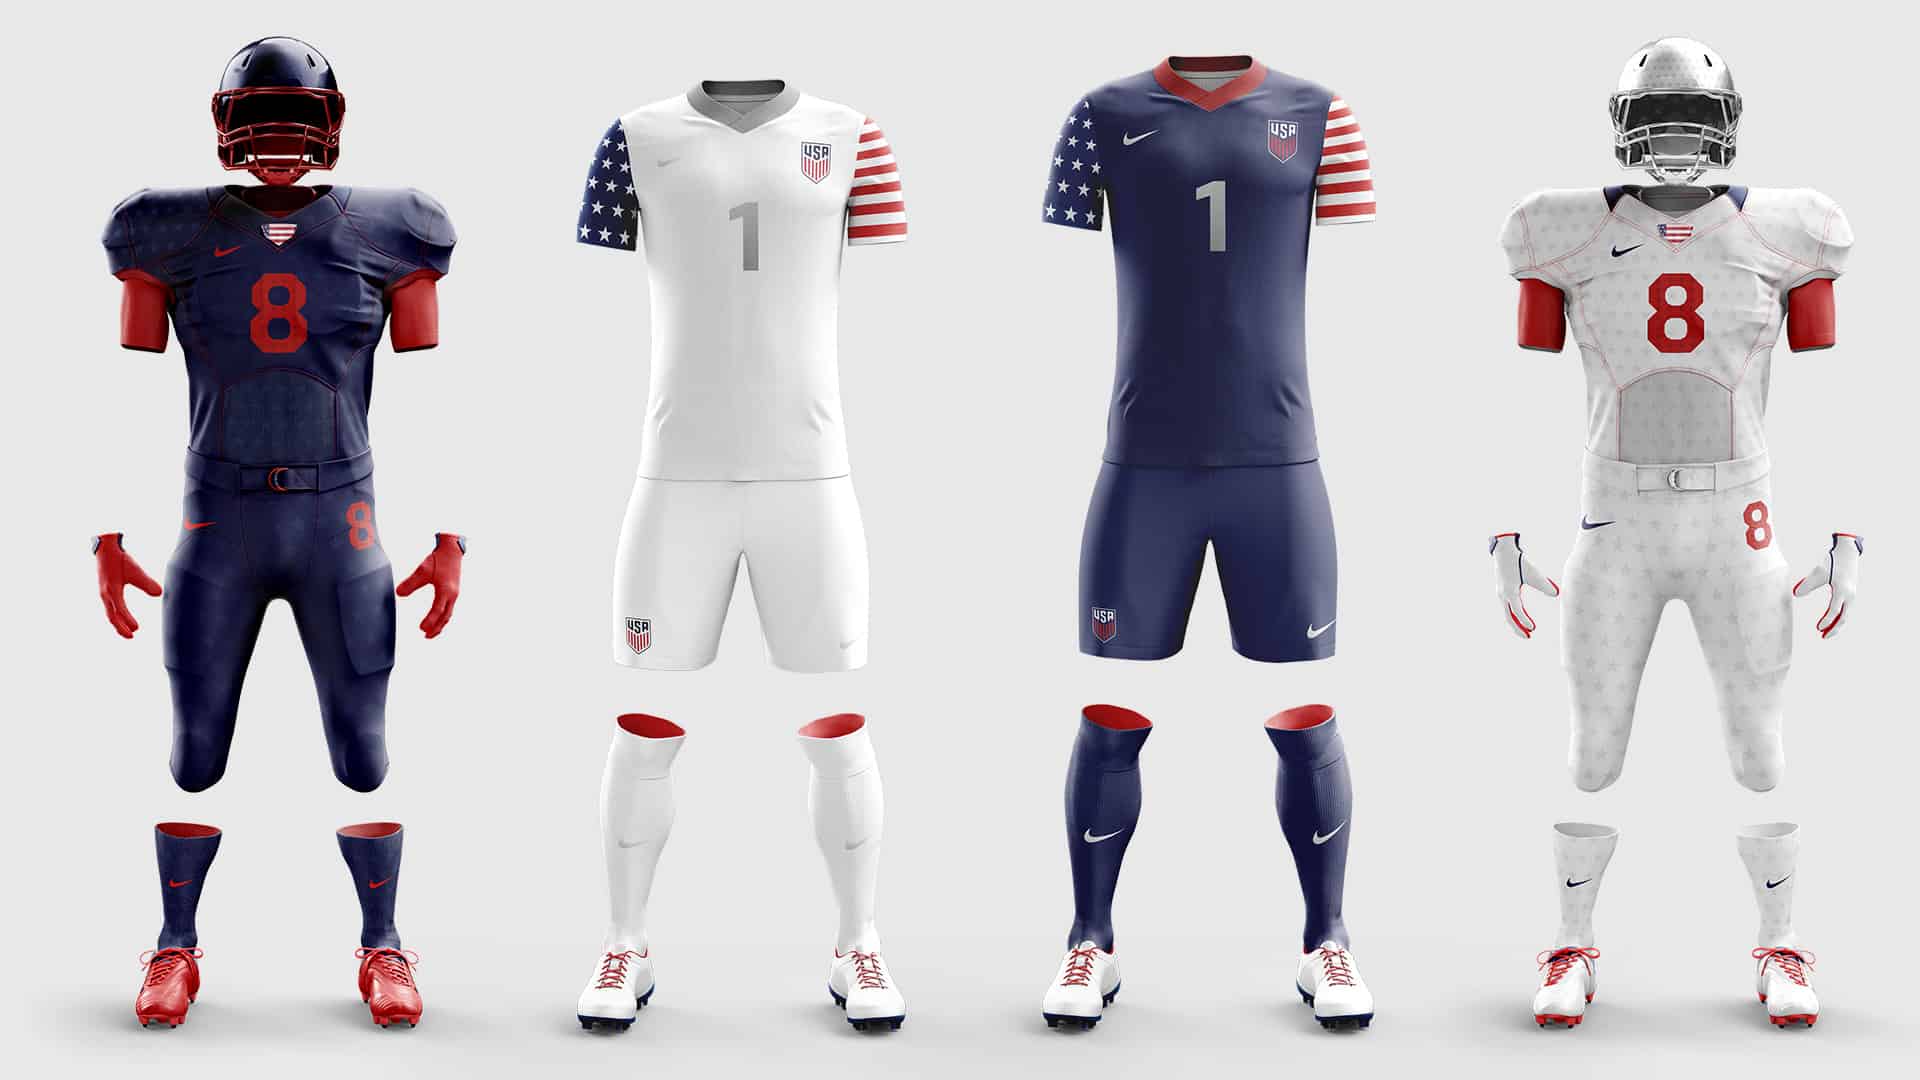 Concept Sports Jersey Designs by DELT - DELT